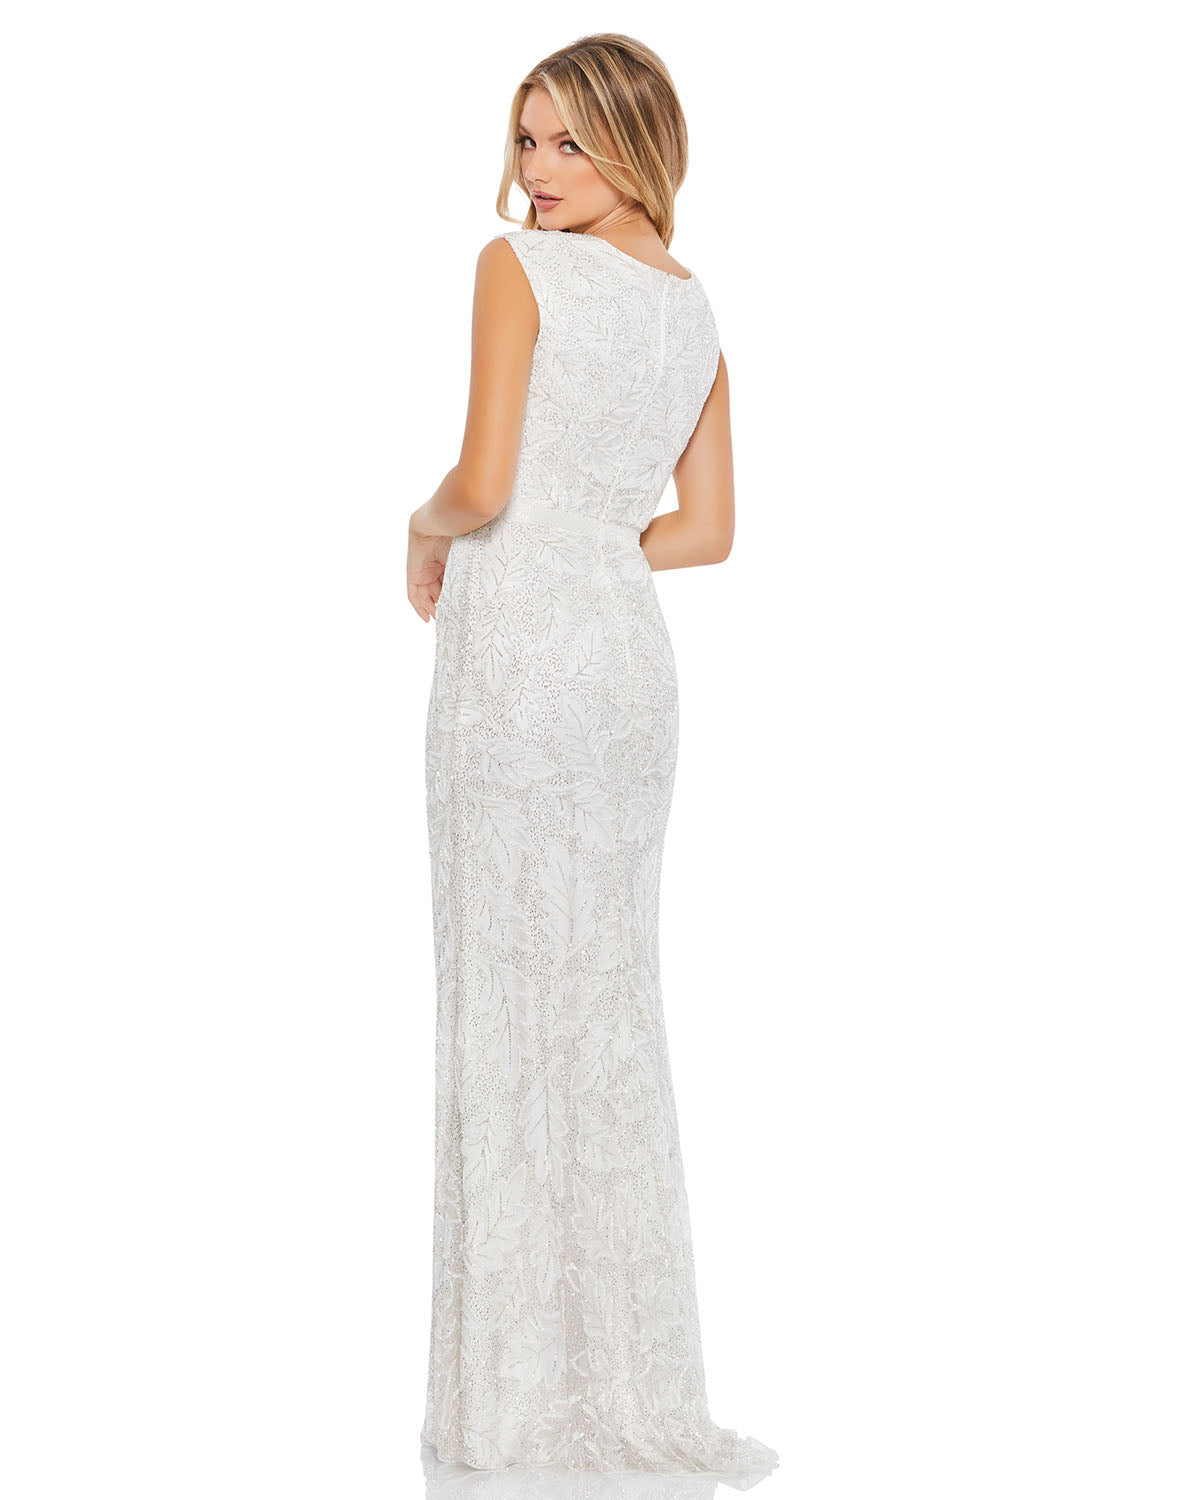 Beaded Cap Sleeve Illusion Plunge Neck Trumpet Gown